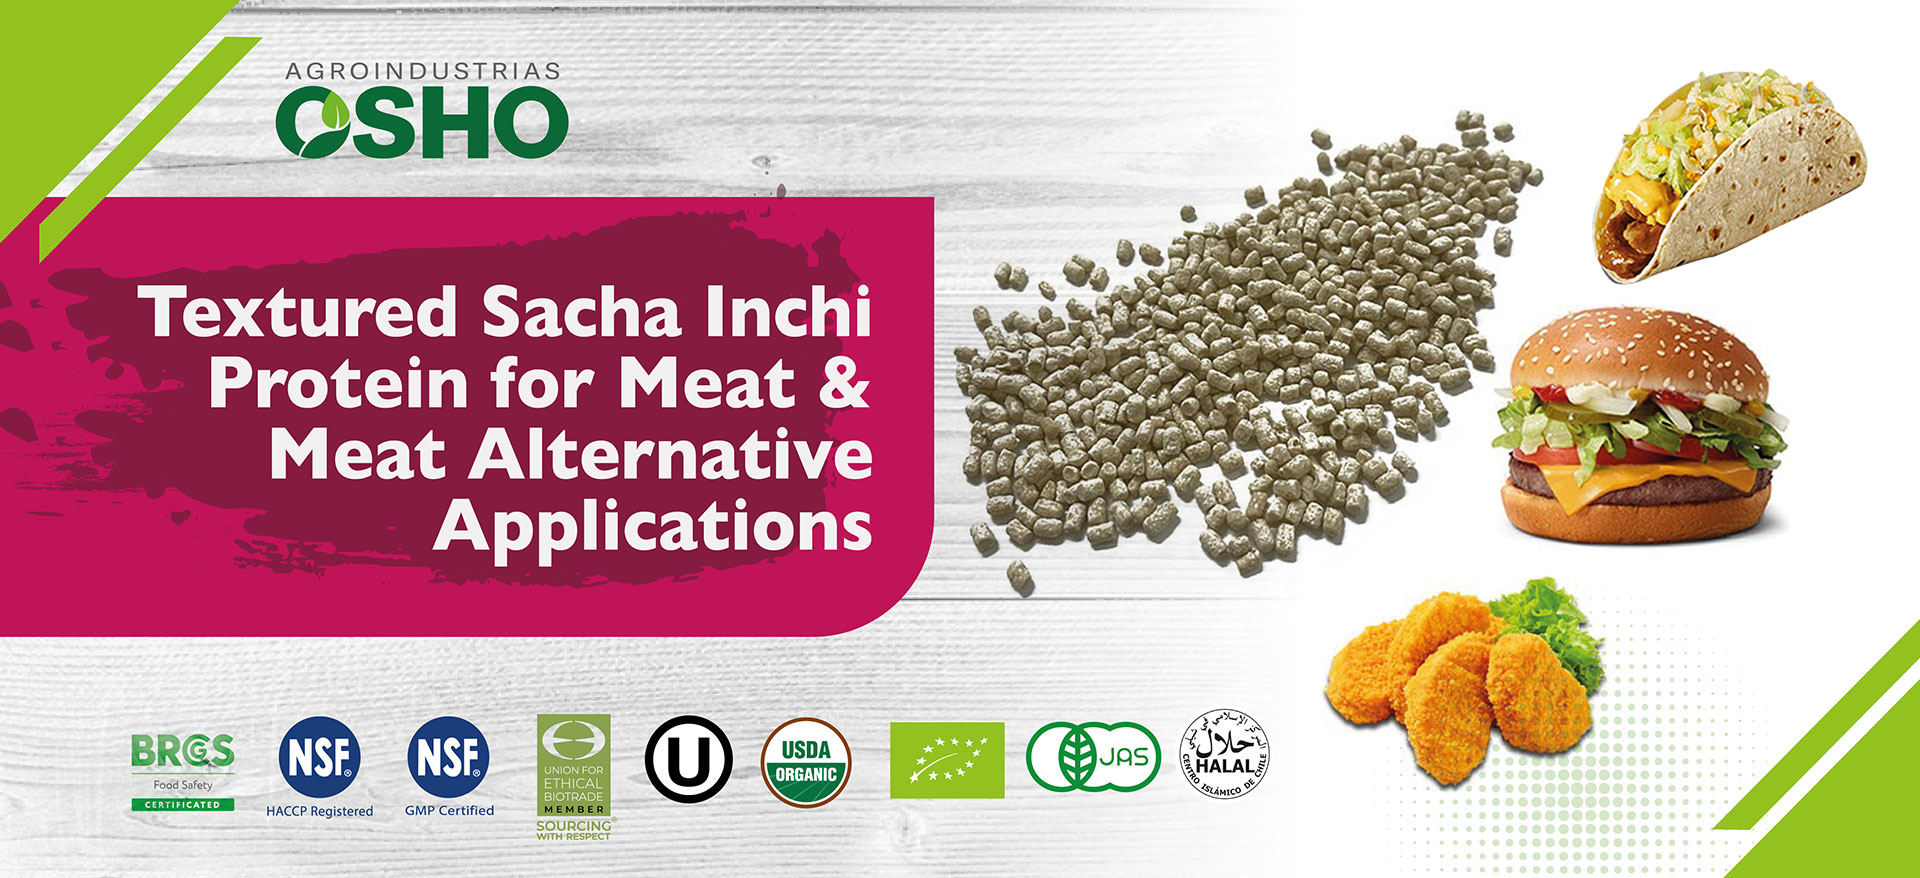 innovations-textured-sacha-inchi-protein-for-meat